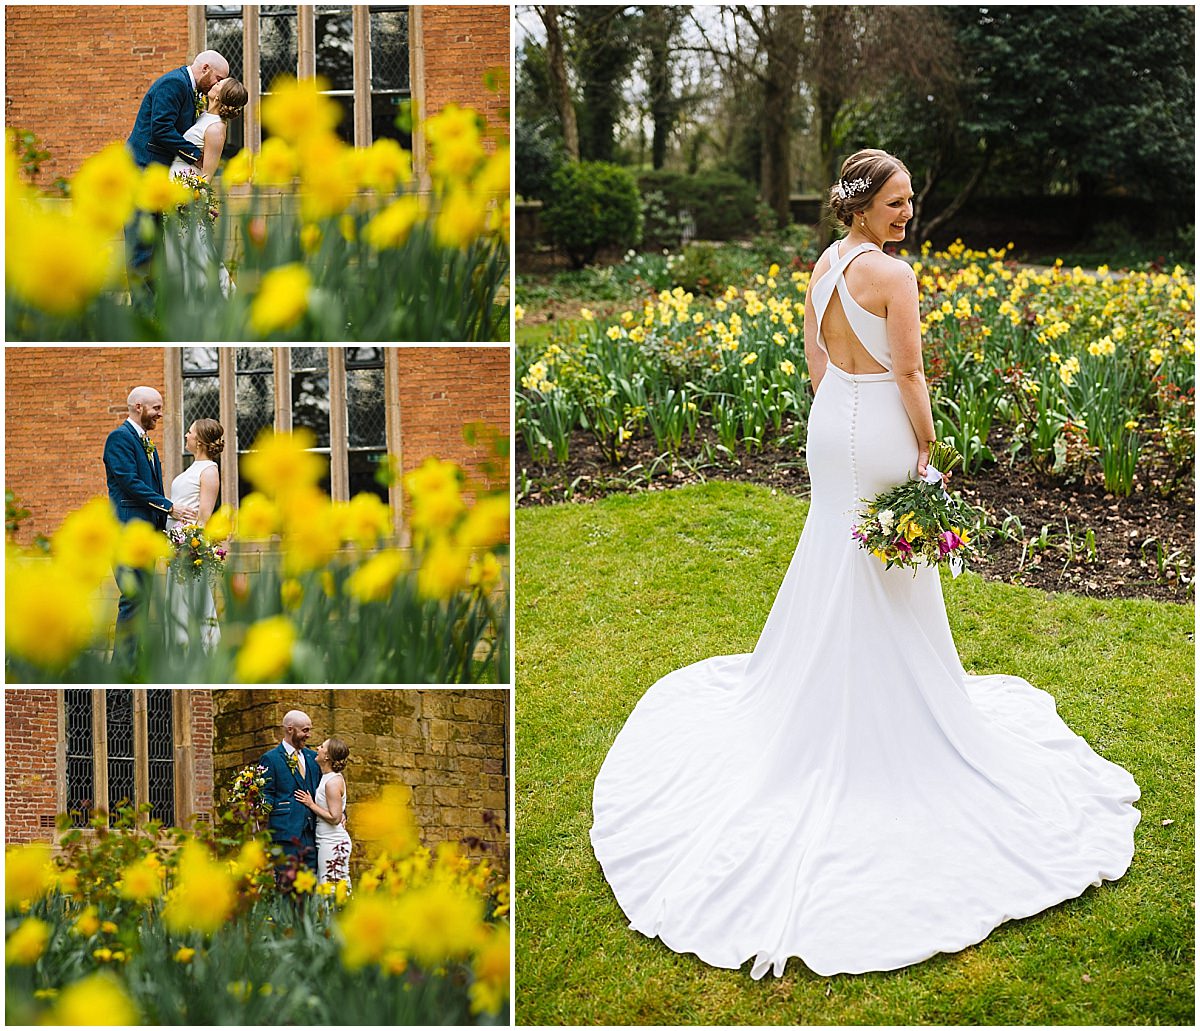 A collage of wedding photos featuring a bride in a white gown with a low back and a groom in a dark suit, both amidst vibrant yellow daffodils in a garden, including a close-up of them kissing and a shot of the bride looking over her shoulder while holding a bouquet.